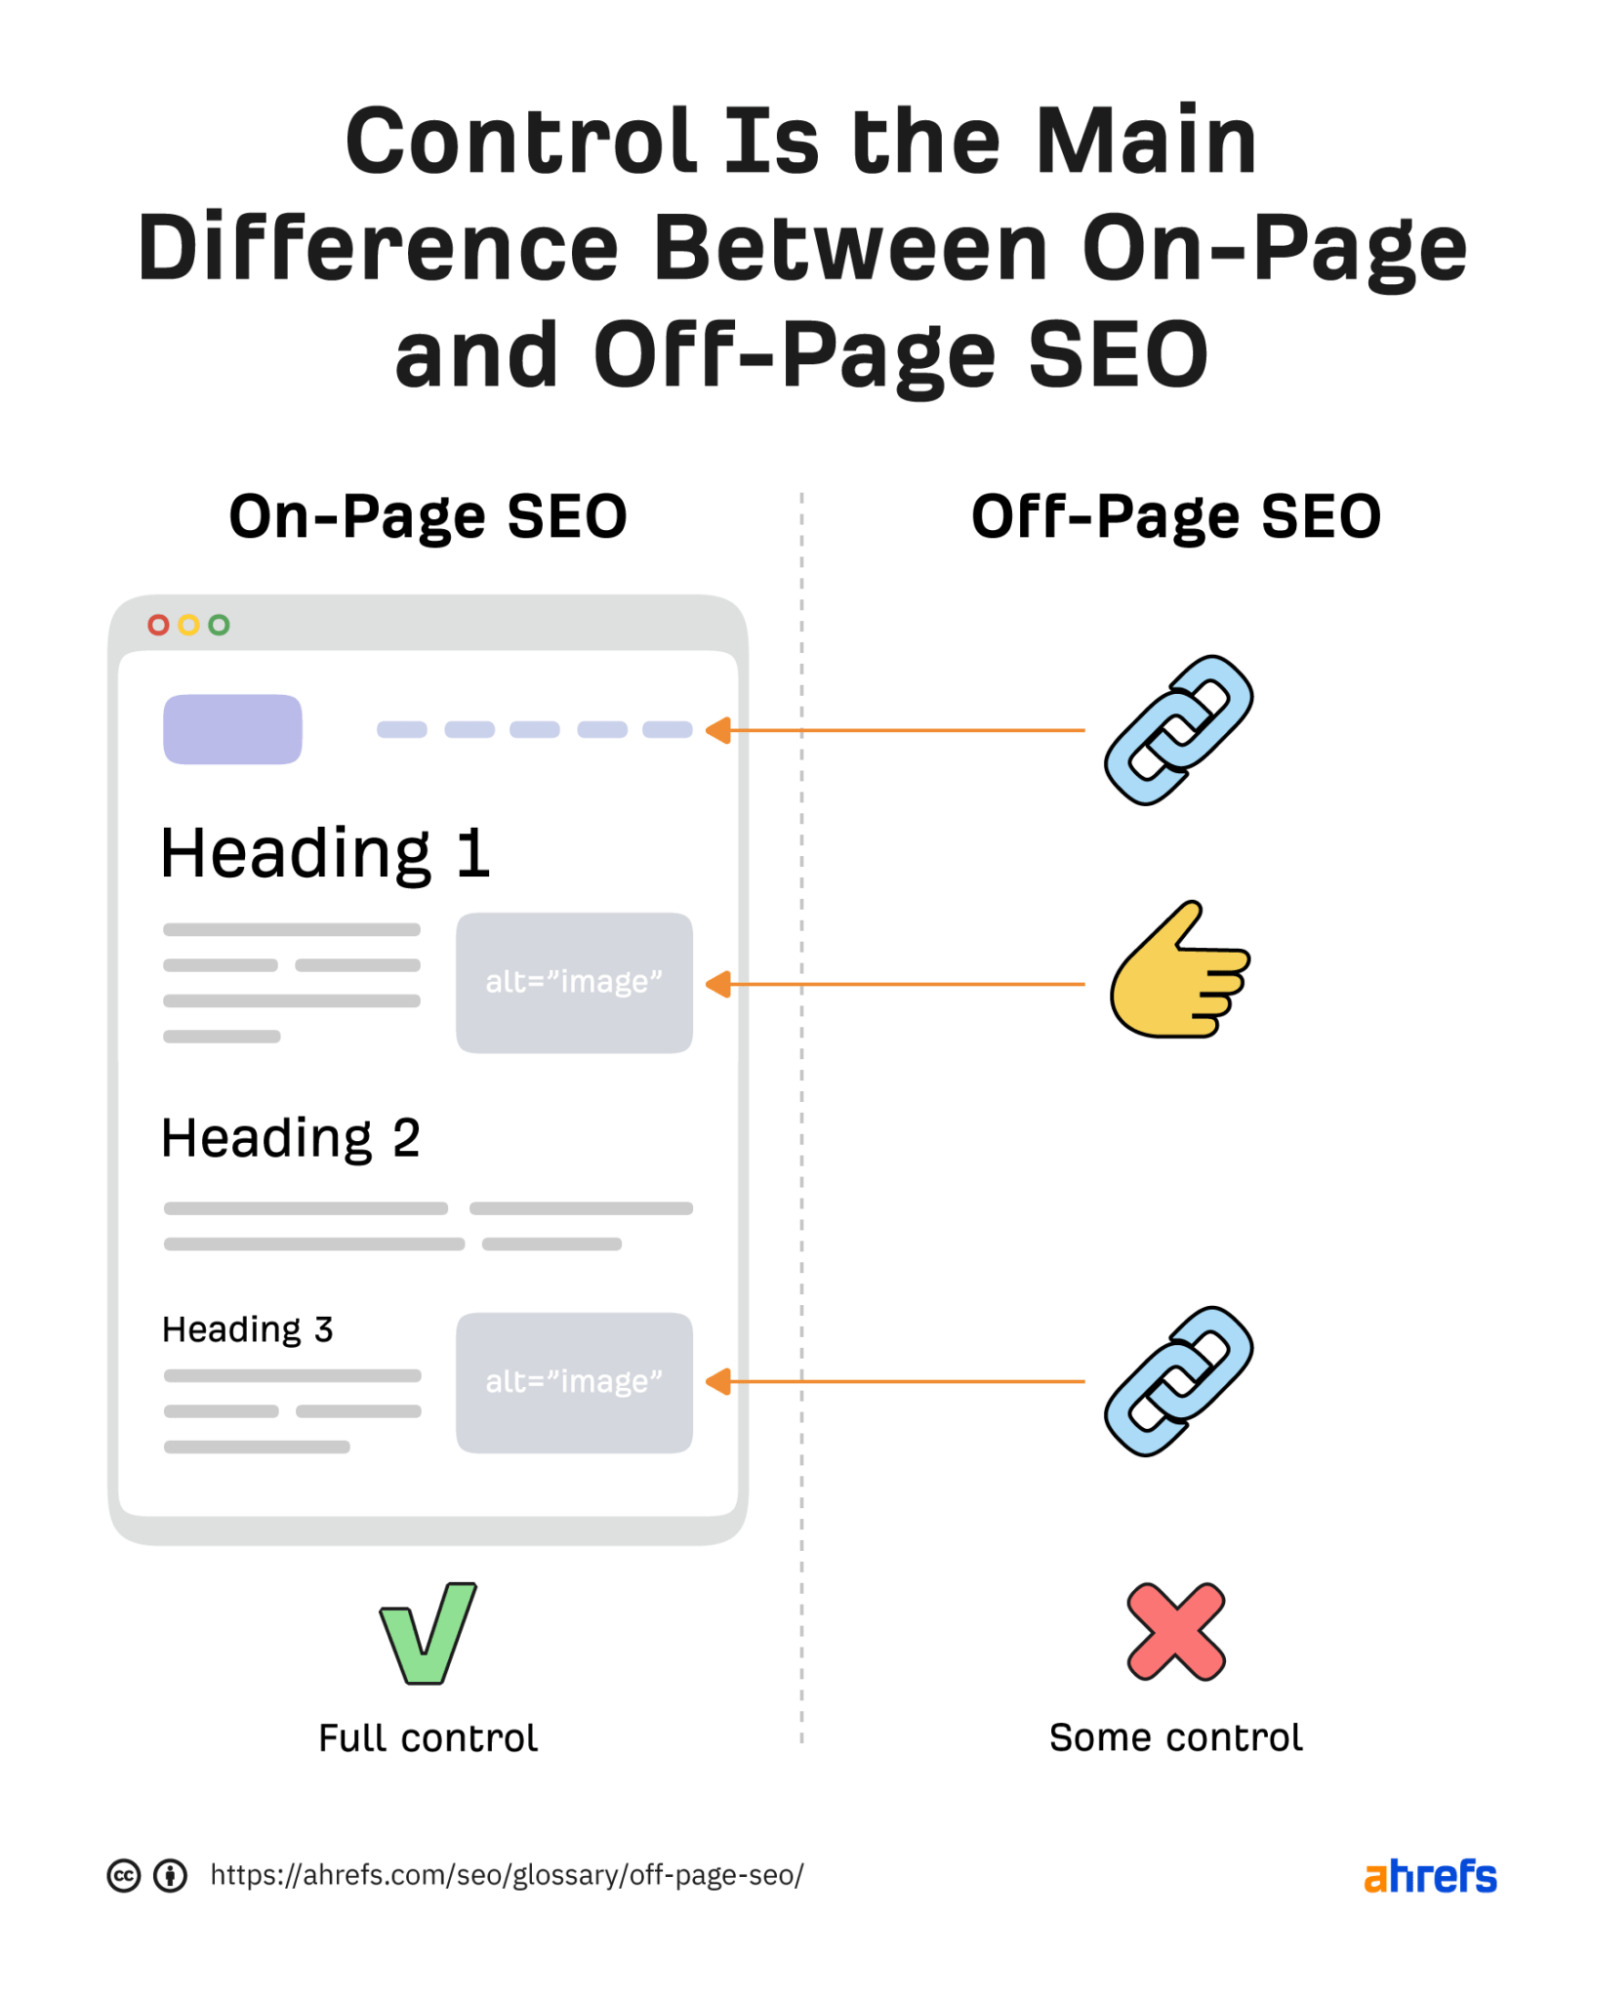 Differences between on-page and off-page SEO